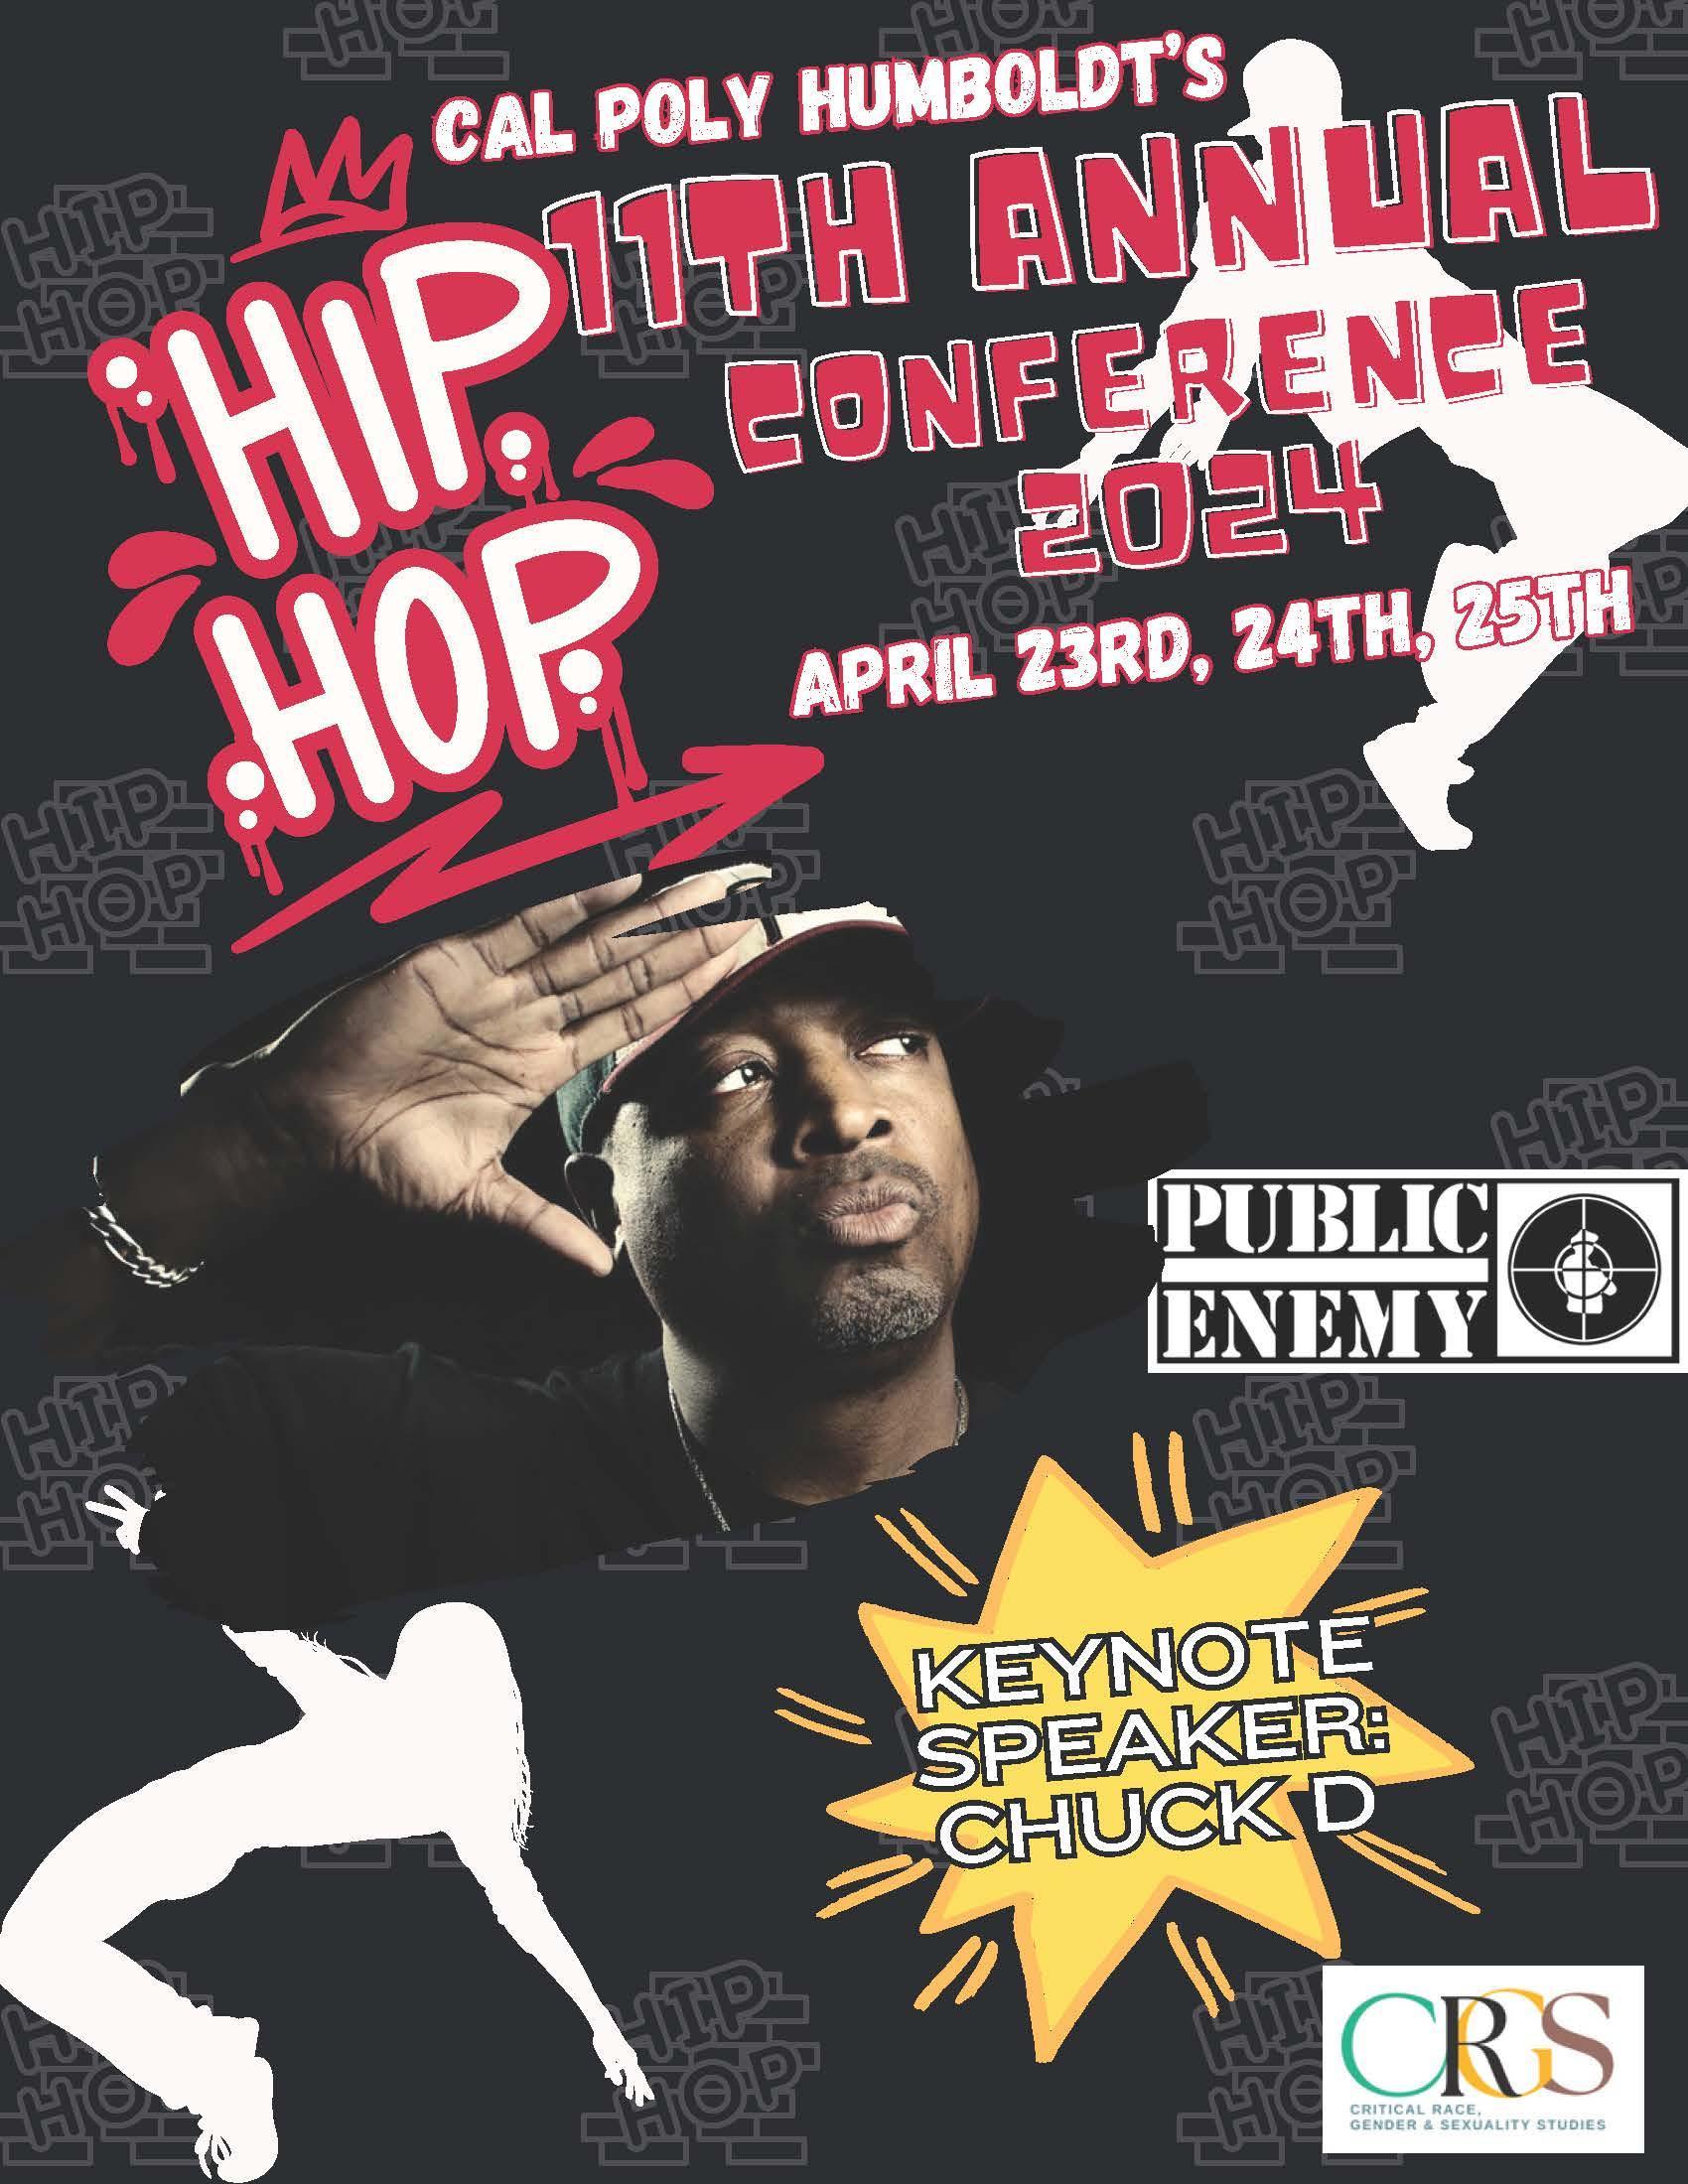 11th Annual Hip Hop Conference featuring Keynote Chuck D of Public Enemy